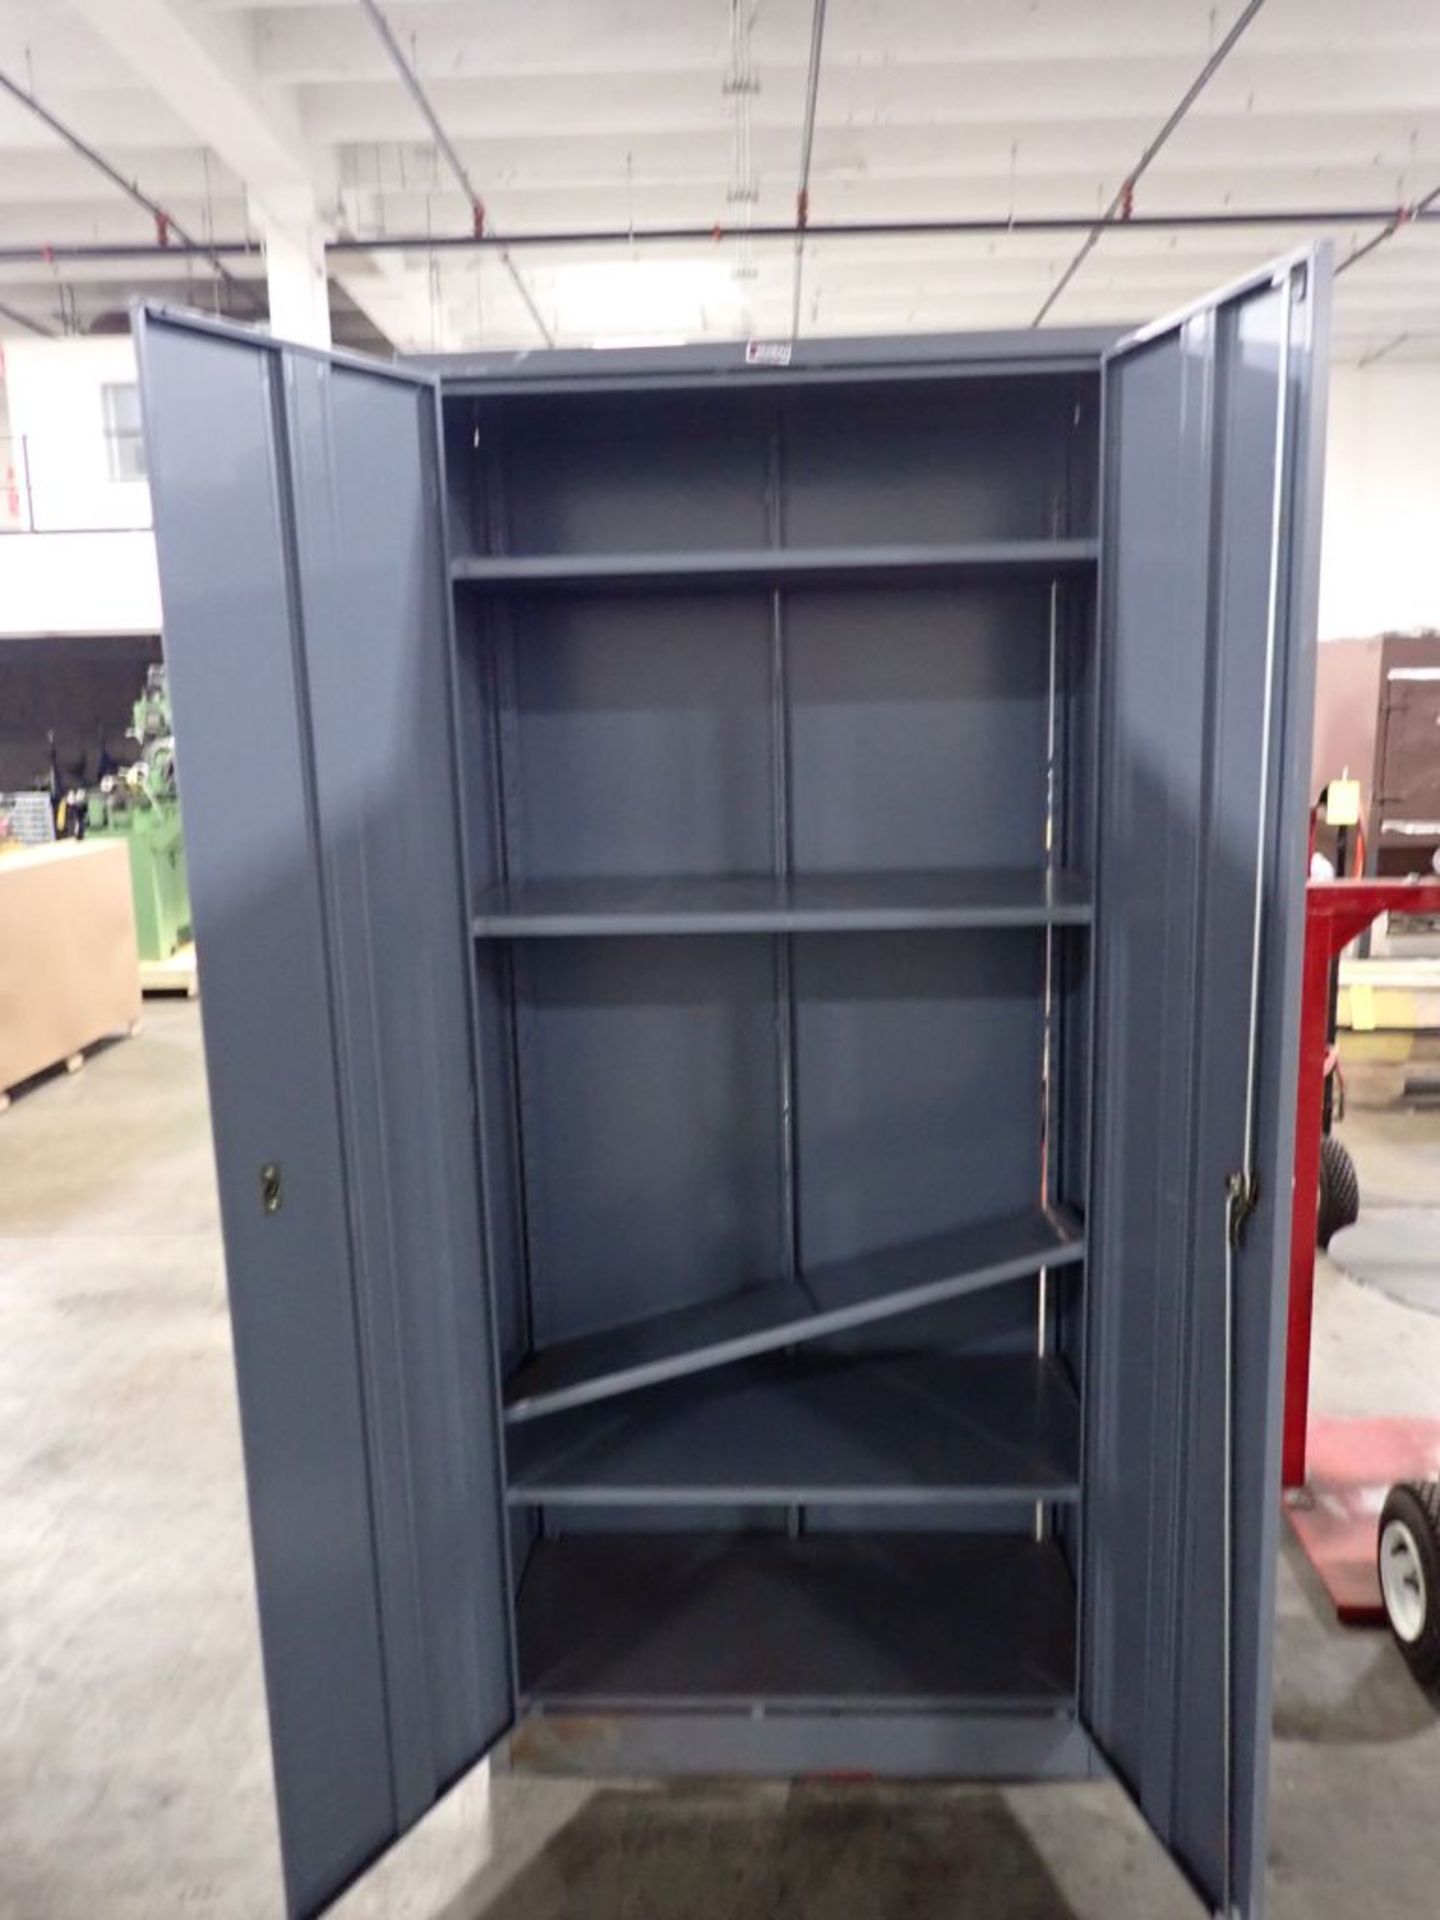 Two Door Metal Cabinet | Tag: 241454 | Limited Forklift Assistance Available - $10.00 Lot Loading - Image 2 of 2